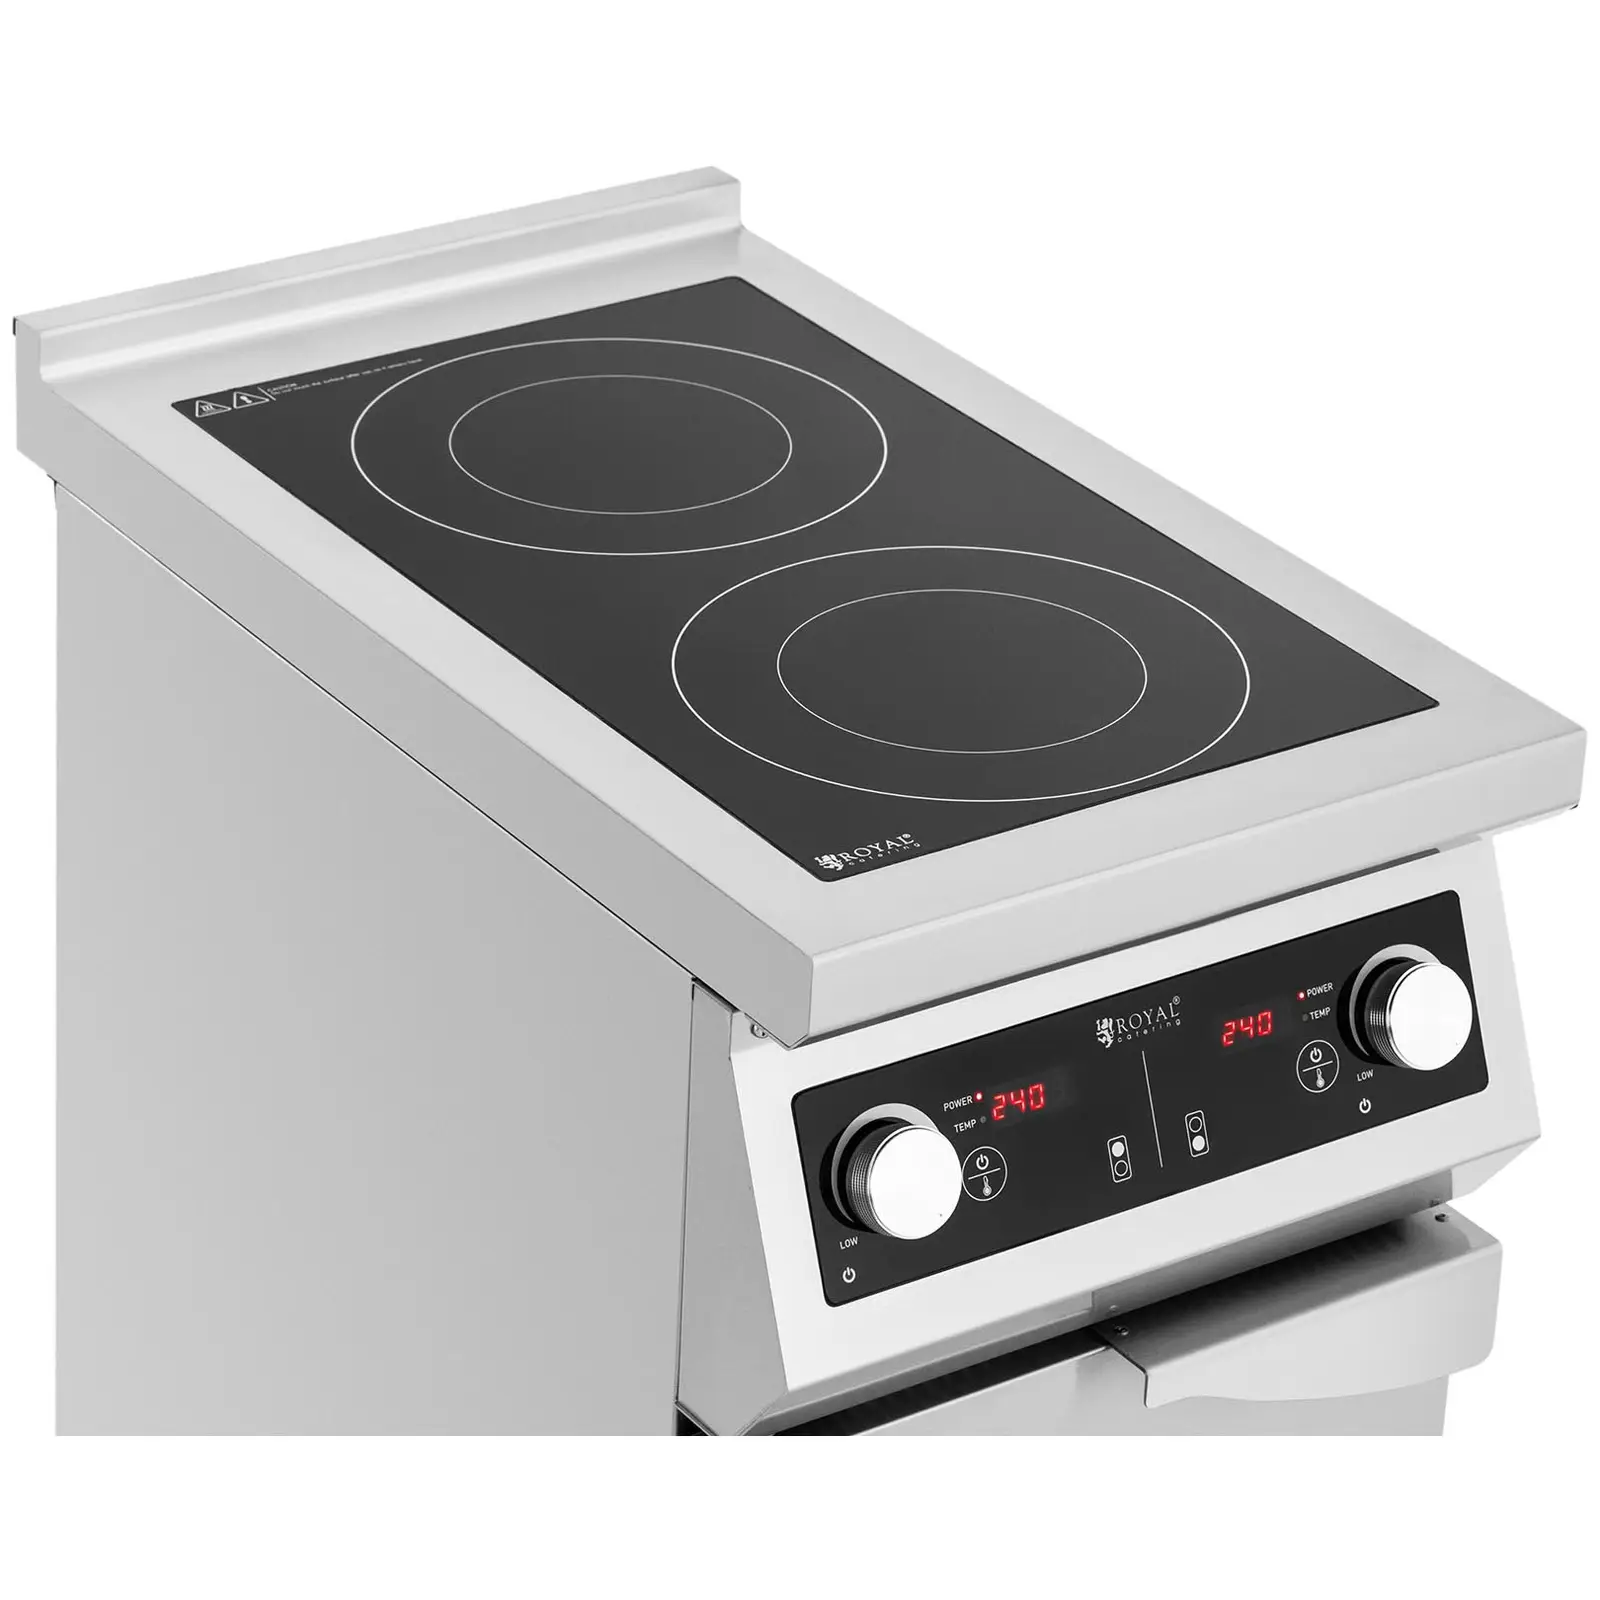 Induction Hob - 8500 W - 2 cooking surfaces - 60 - 240 °C - Storage space - Royal Catering